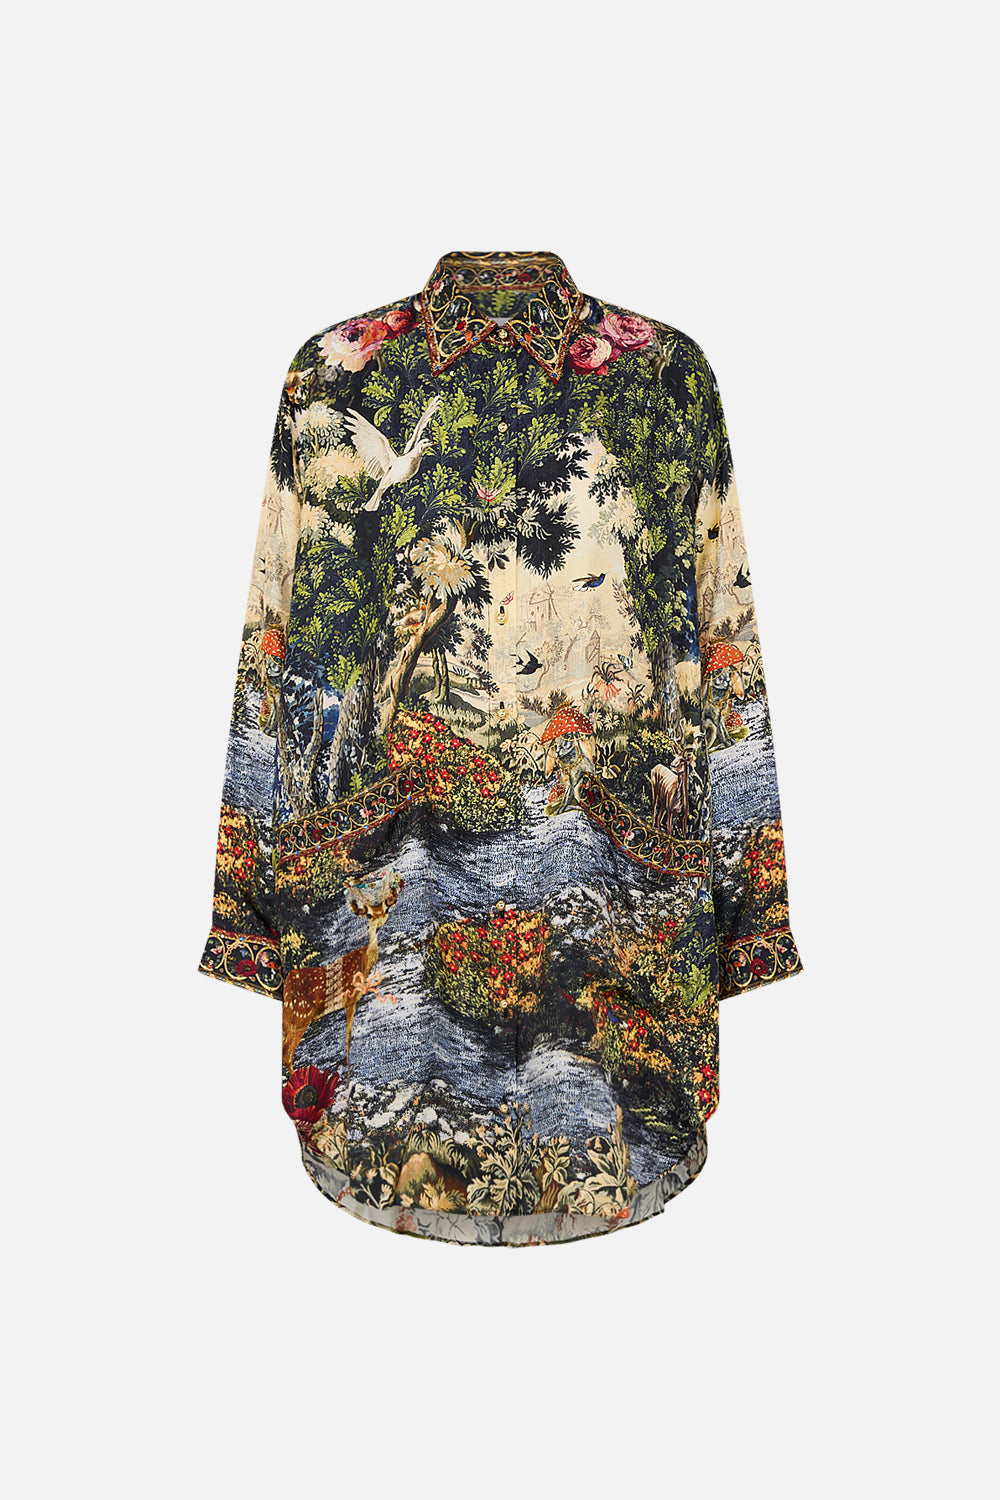 SHIRT TUNIC WITH POCKETS TAPESTRY TOTEMS